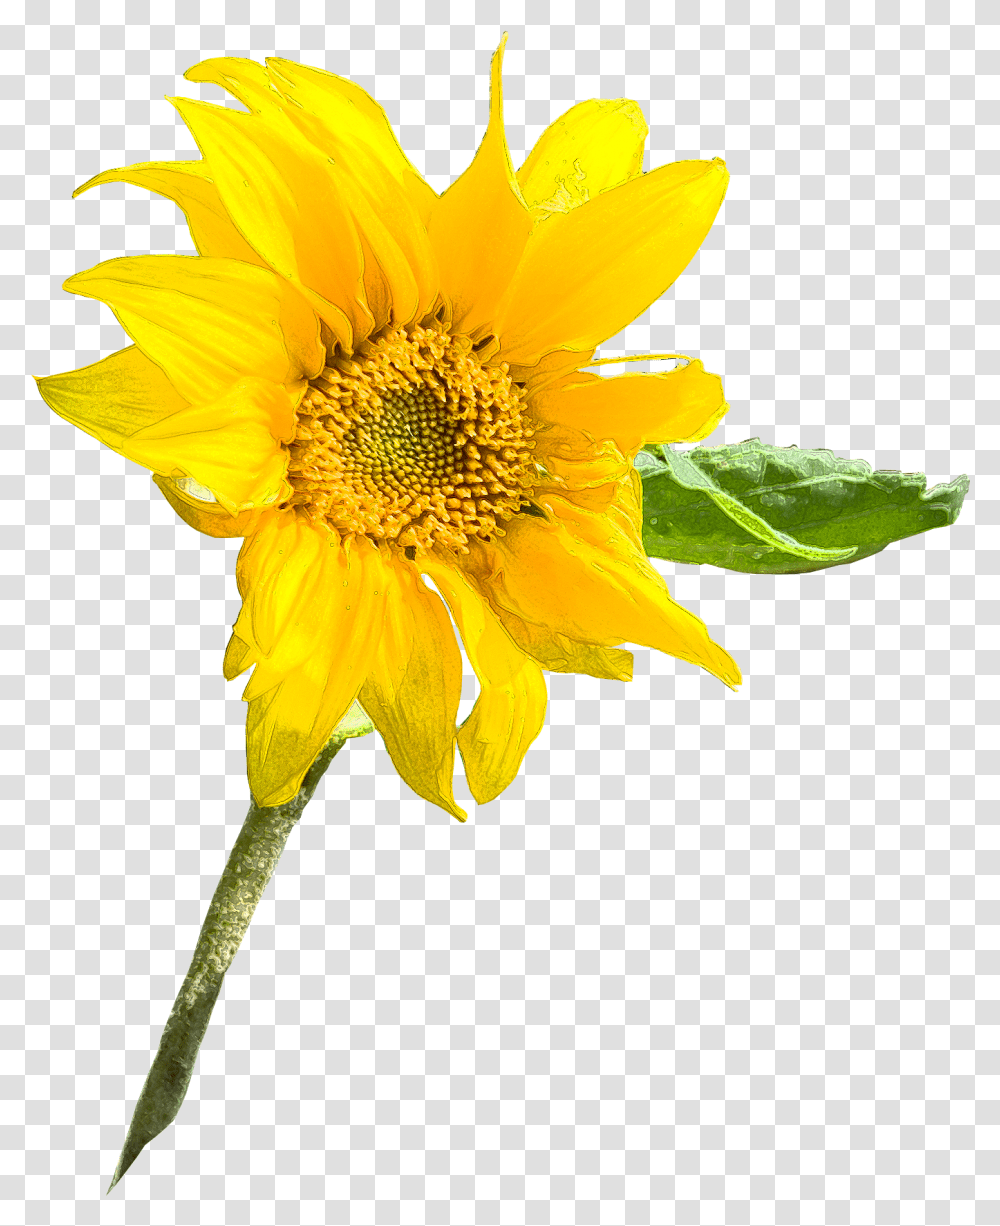 Sunflower Seed Annual Plant Sunflower M Sunflowers Common Sunflower, Blossom, Daisy, Daisies, Treasure Flower Transparent Png